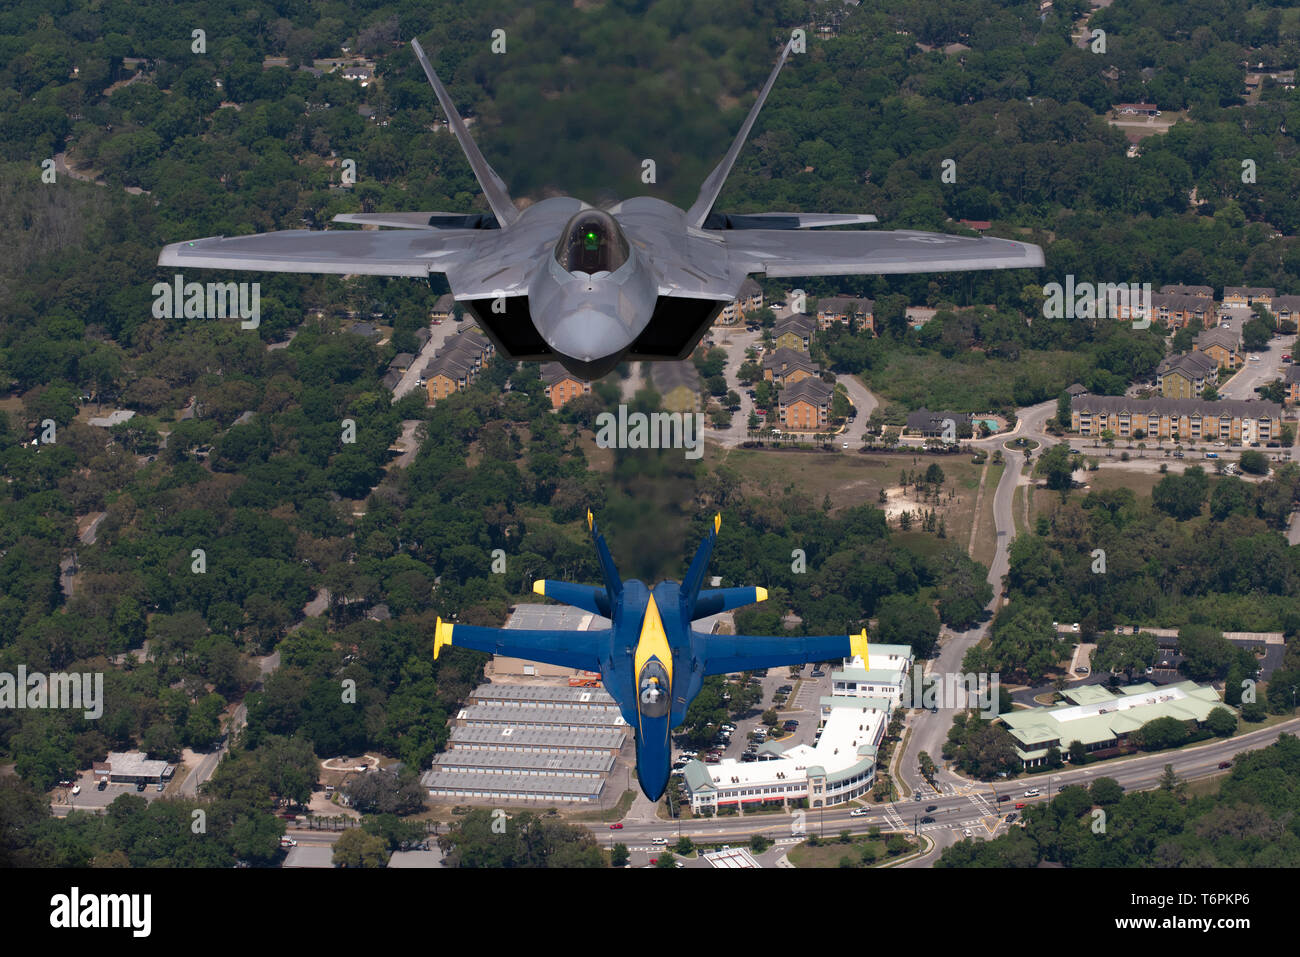 U.S. Air Force Maj. Paul 'Loco' Lopez, F-22 Demo Team commander/pilot, flies above the U.S. Navy Blue Angels during an iconic formation, in Beaufort, South Carolina, April 25, 2019. This hour-long historic flight featured two of the world's premier aerial demonstration teams. (U.S. Air Force photo by 2nd Lt. Samuel Eckholm) Stock Photo